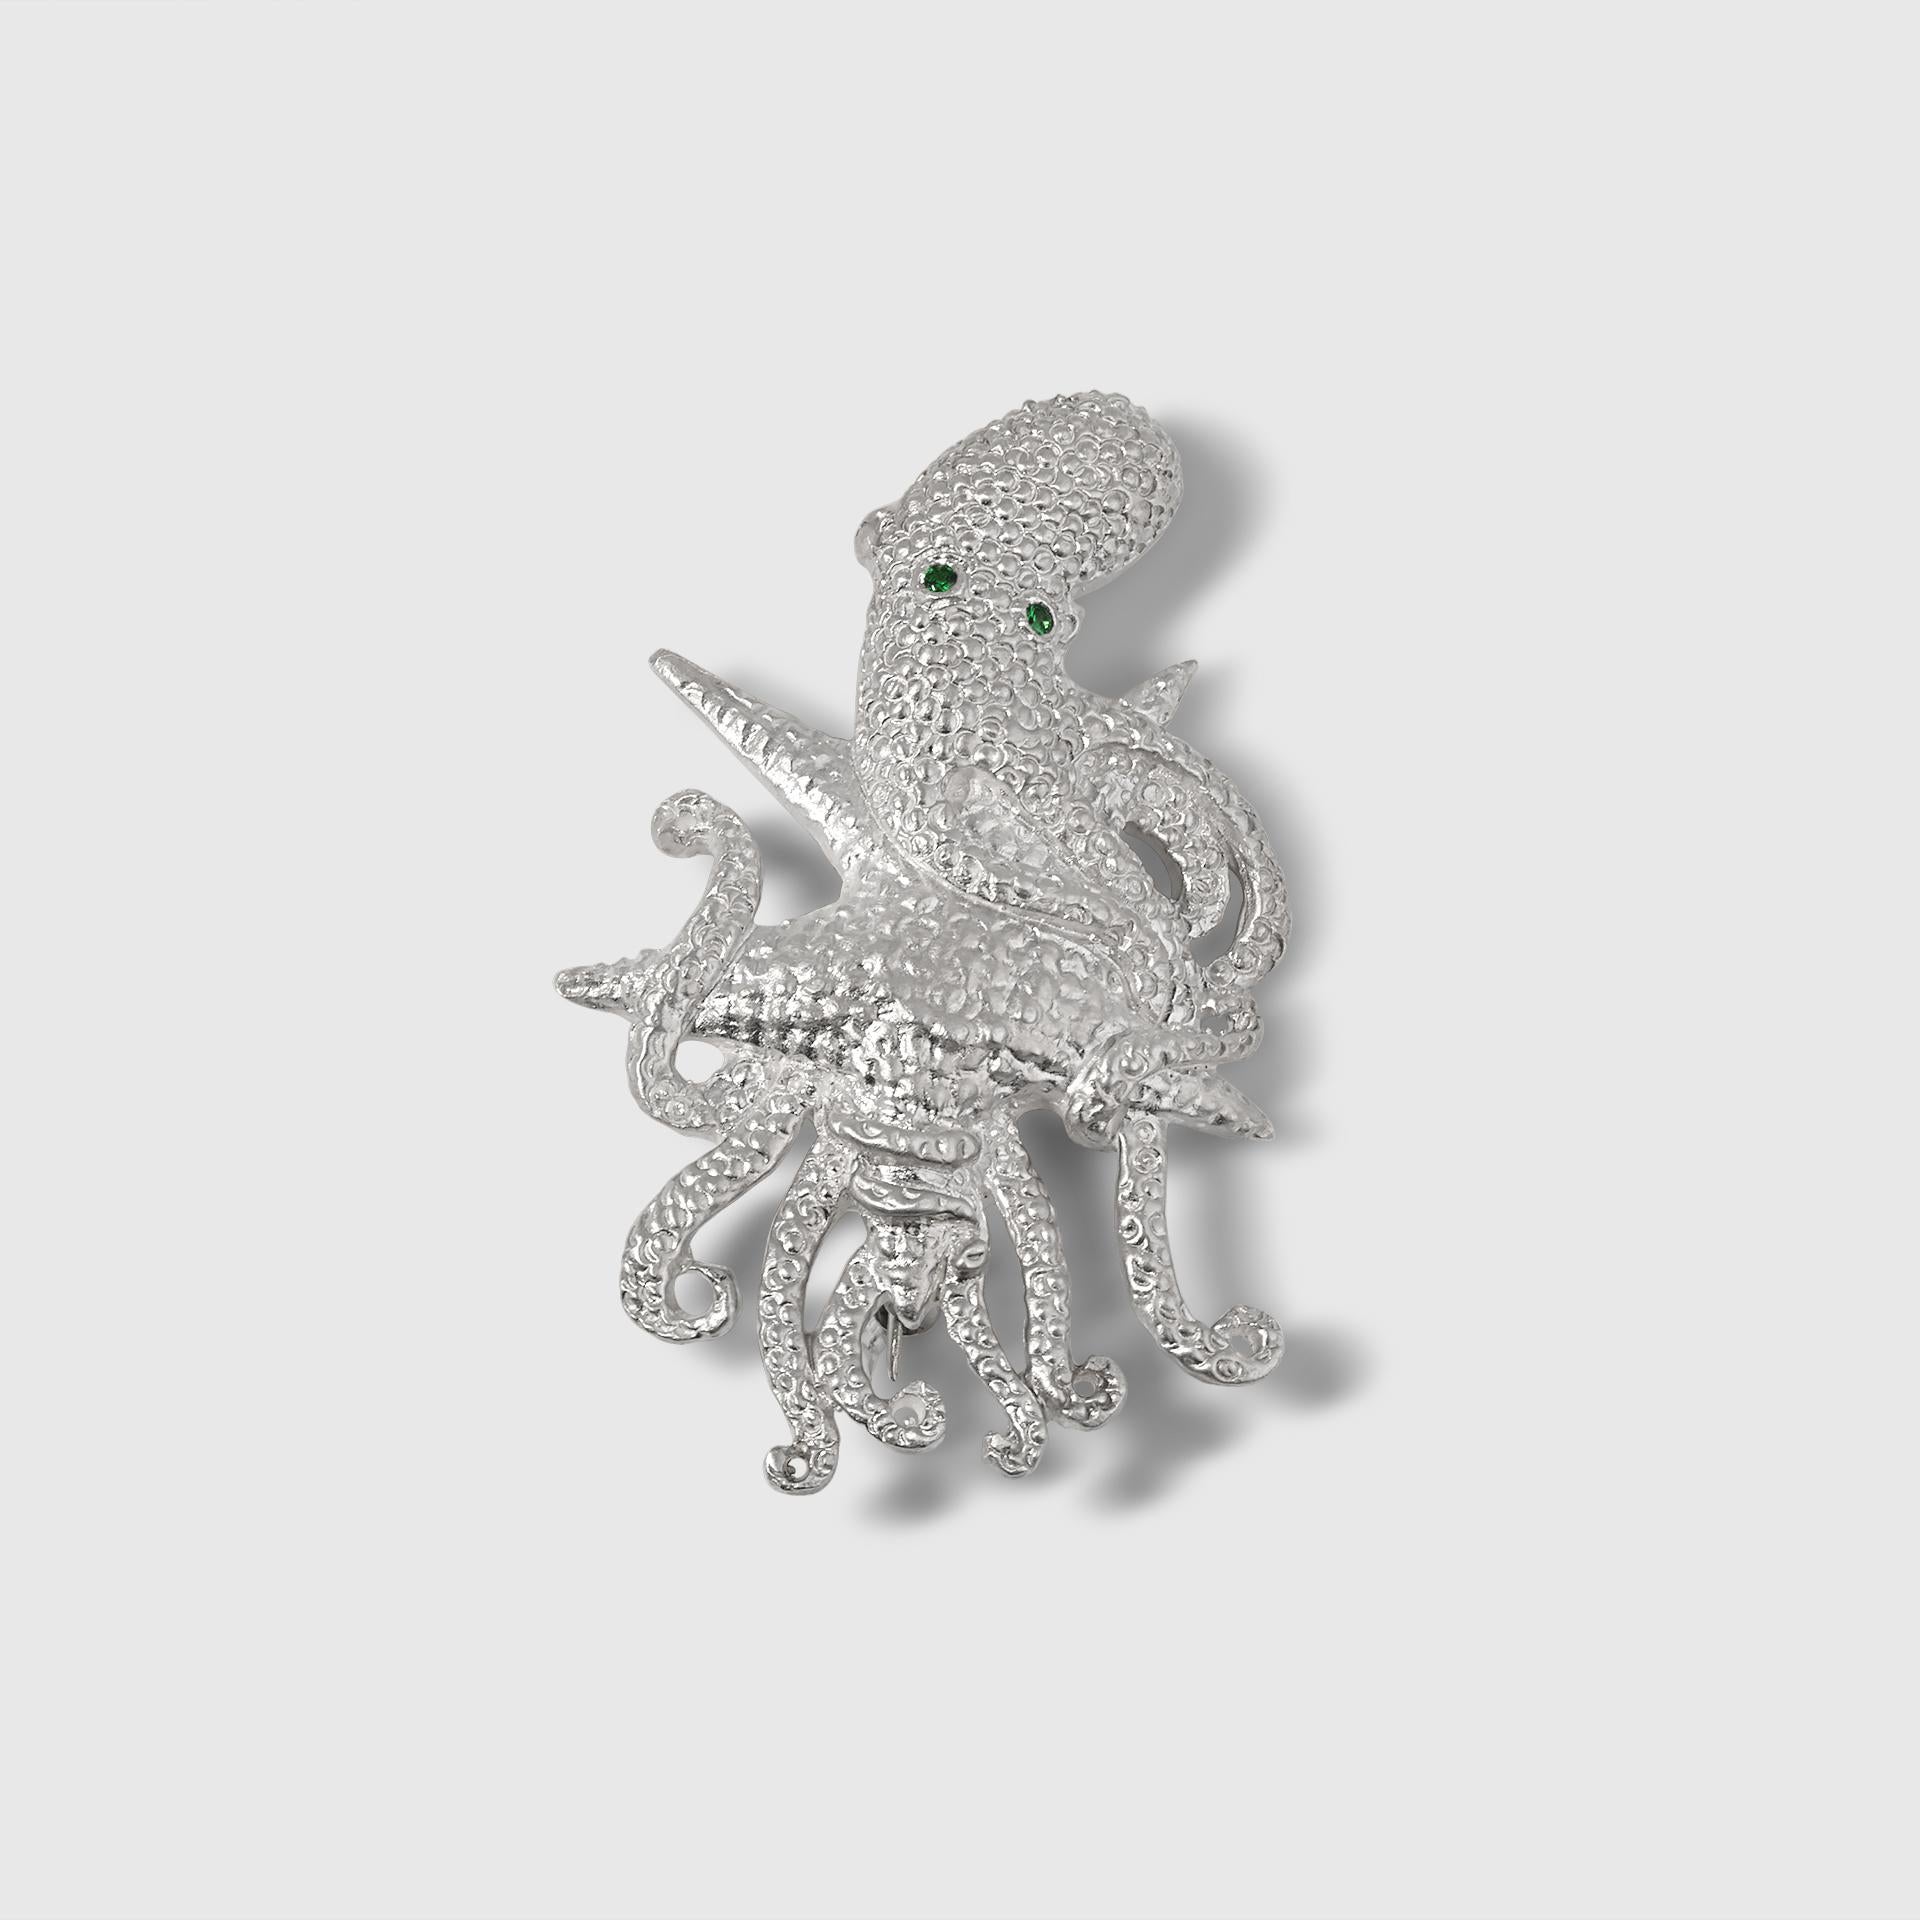 Large, Stunning Sterling Silver Detailed Octopus Brooch Pin w/ Round, Bright Green, Tsavorite Eyes by Ashley Childs

This stunning detailed octopus was originally carved by 